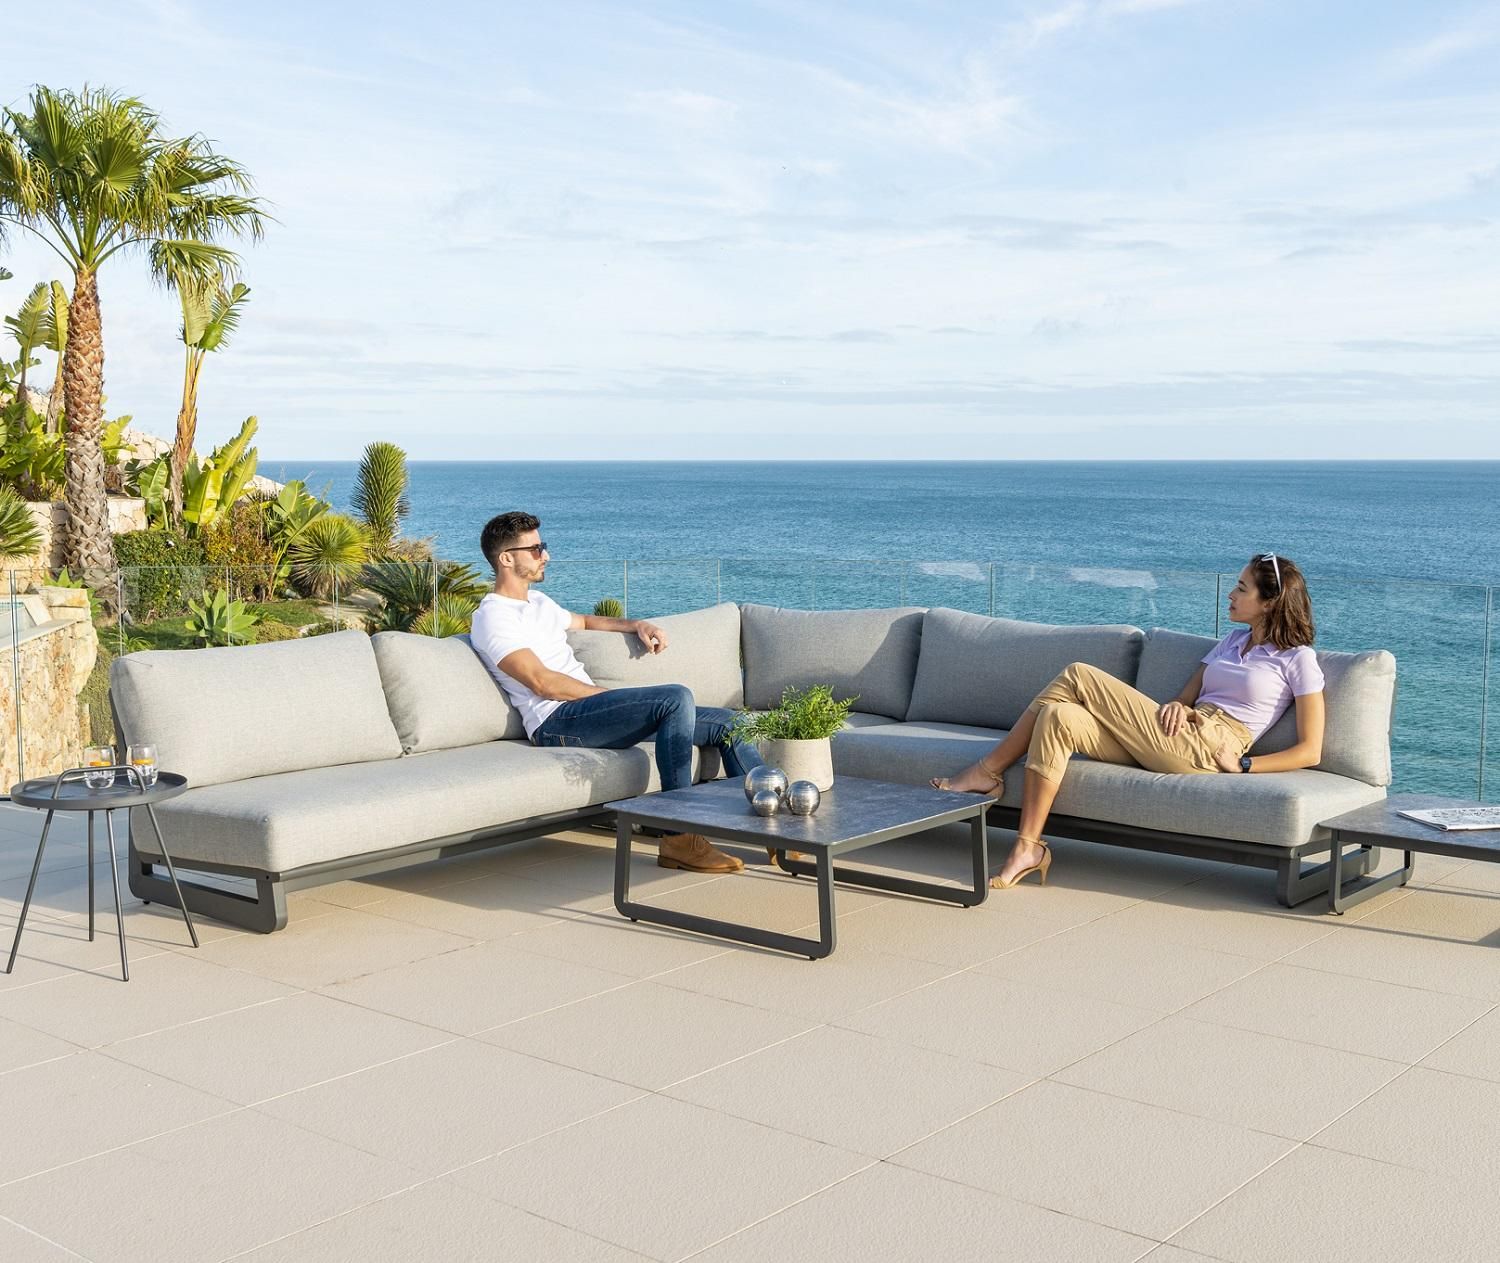 Modular Garden Corner Lounge Sofa Pieces In Aluminium & All Weather Throughout Fabric Outdoor Middle Chair Sets (View 4 of 15)